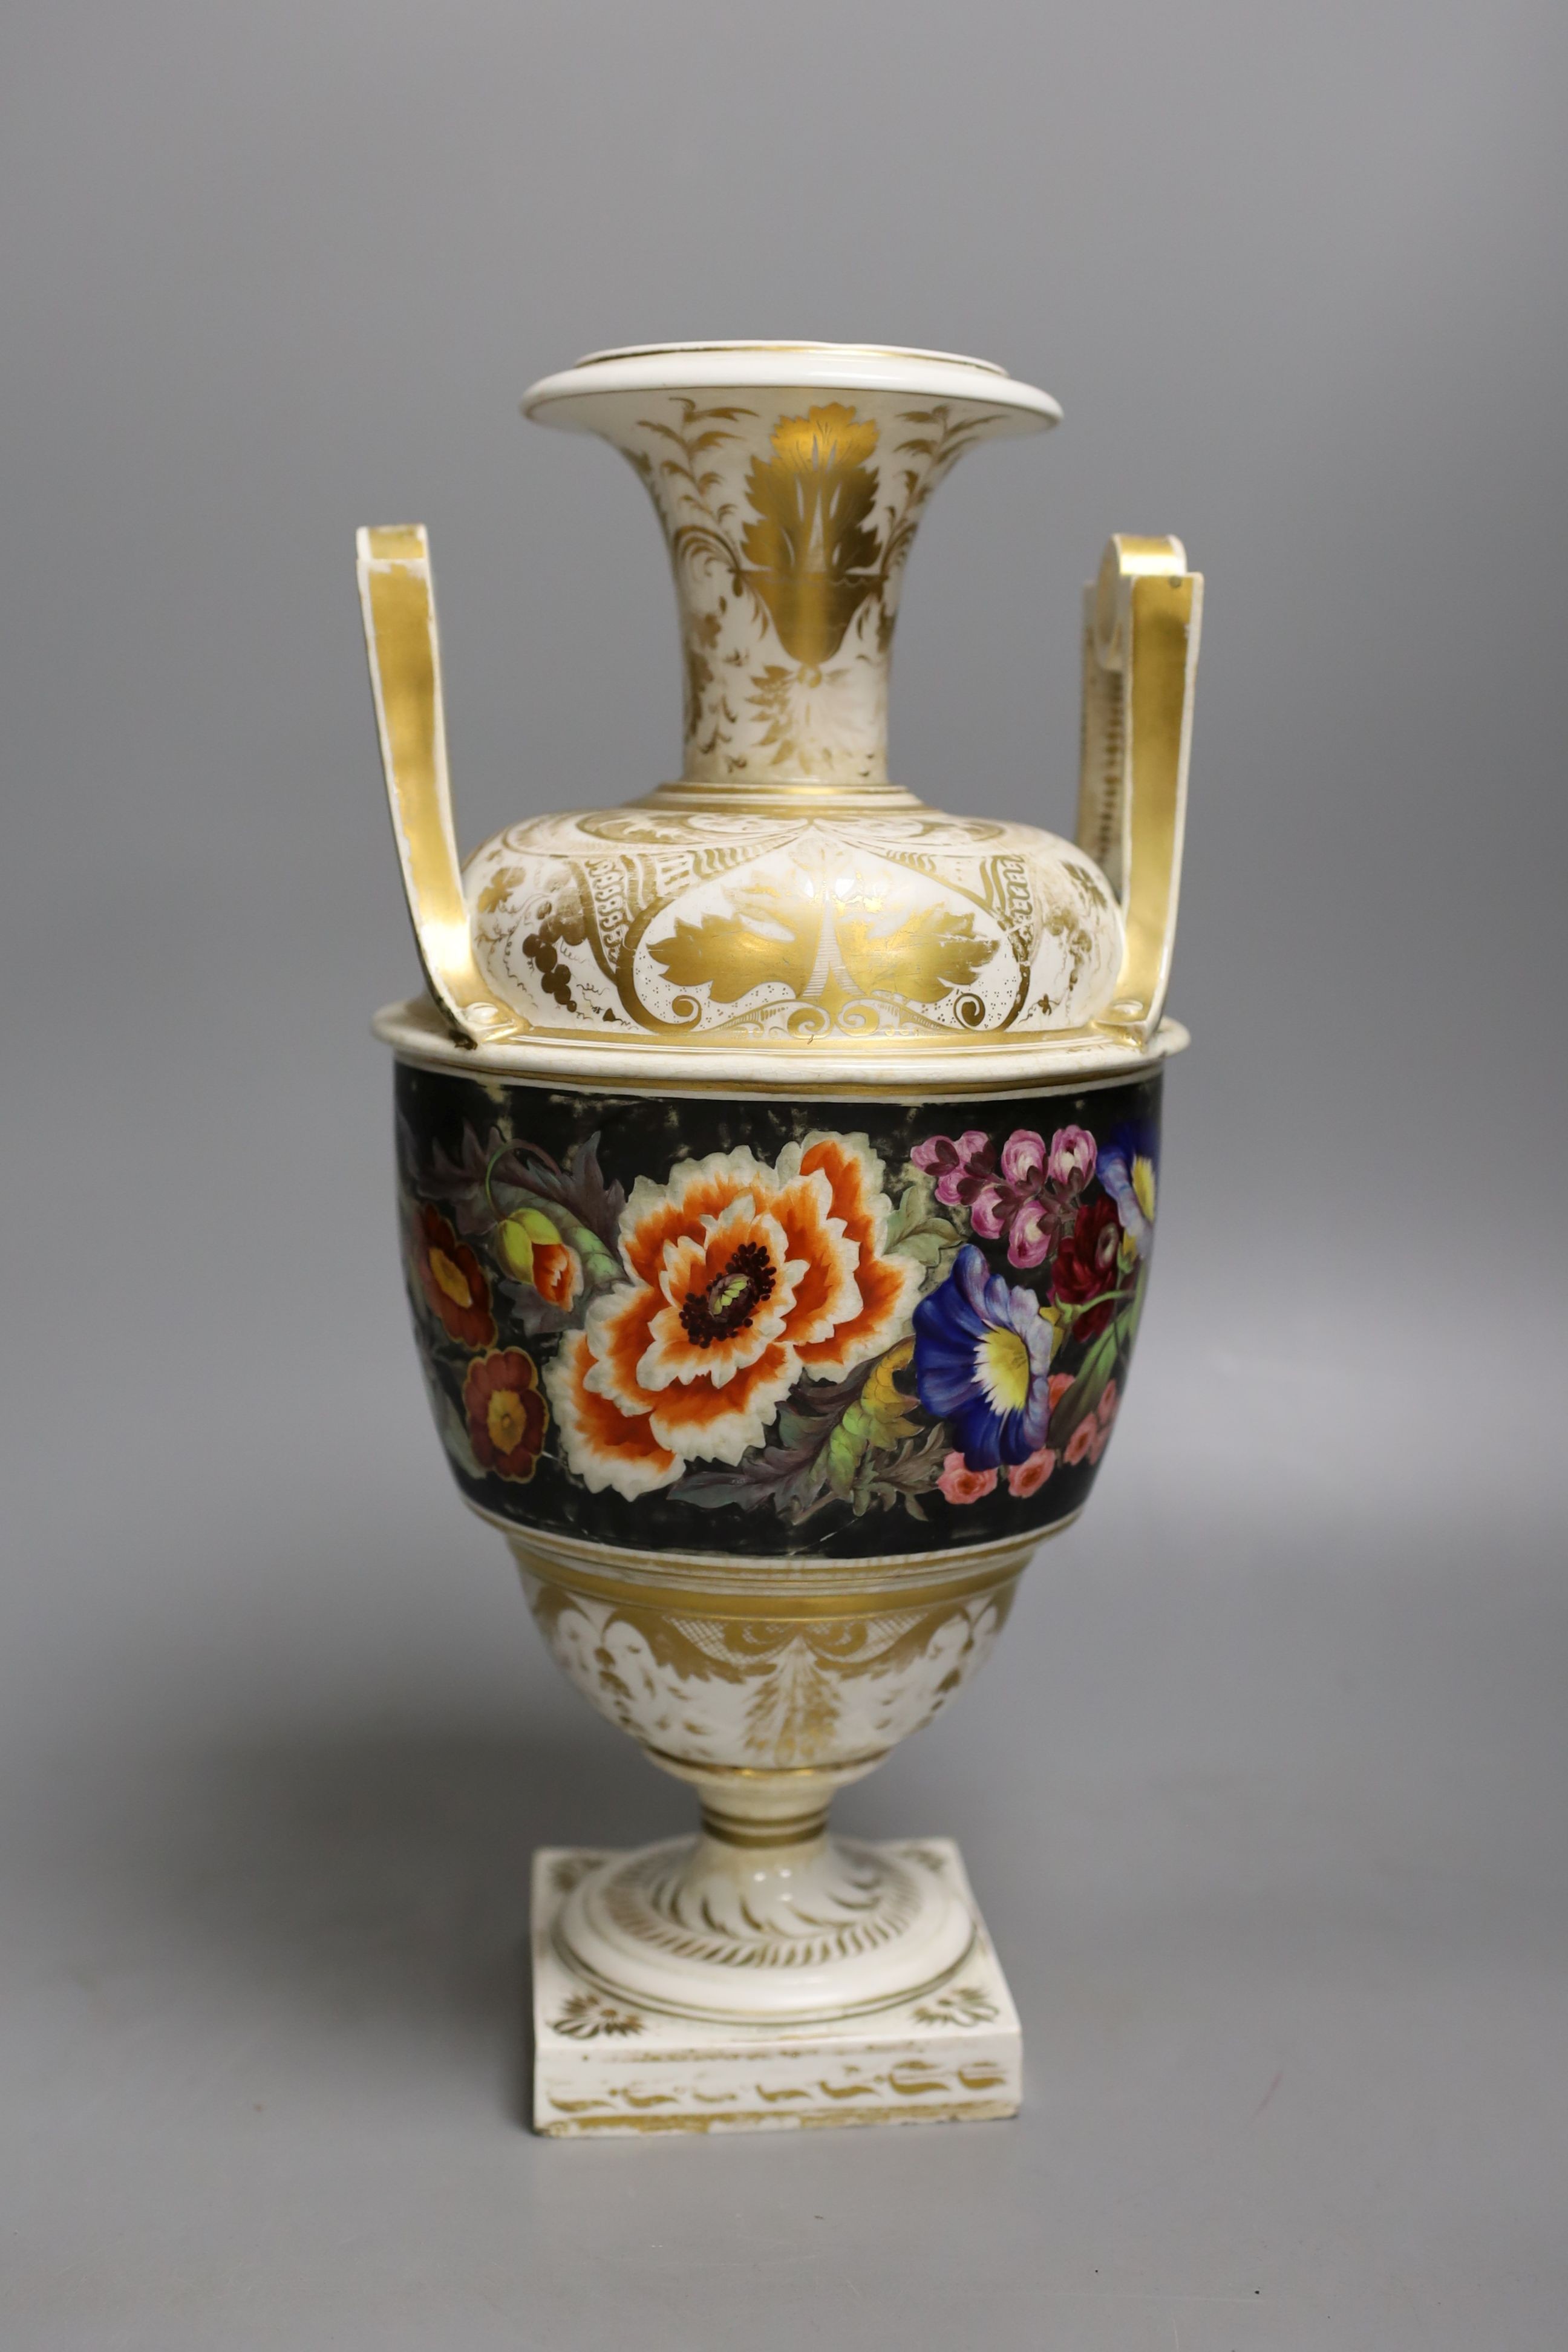 A Derby vase painted with flowers on a dark grey ground, painted by William 'Quaker' Pegg, red mark c.1820, 31.5cm high